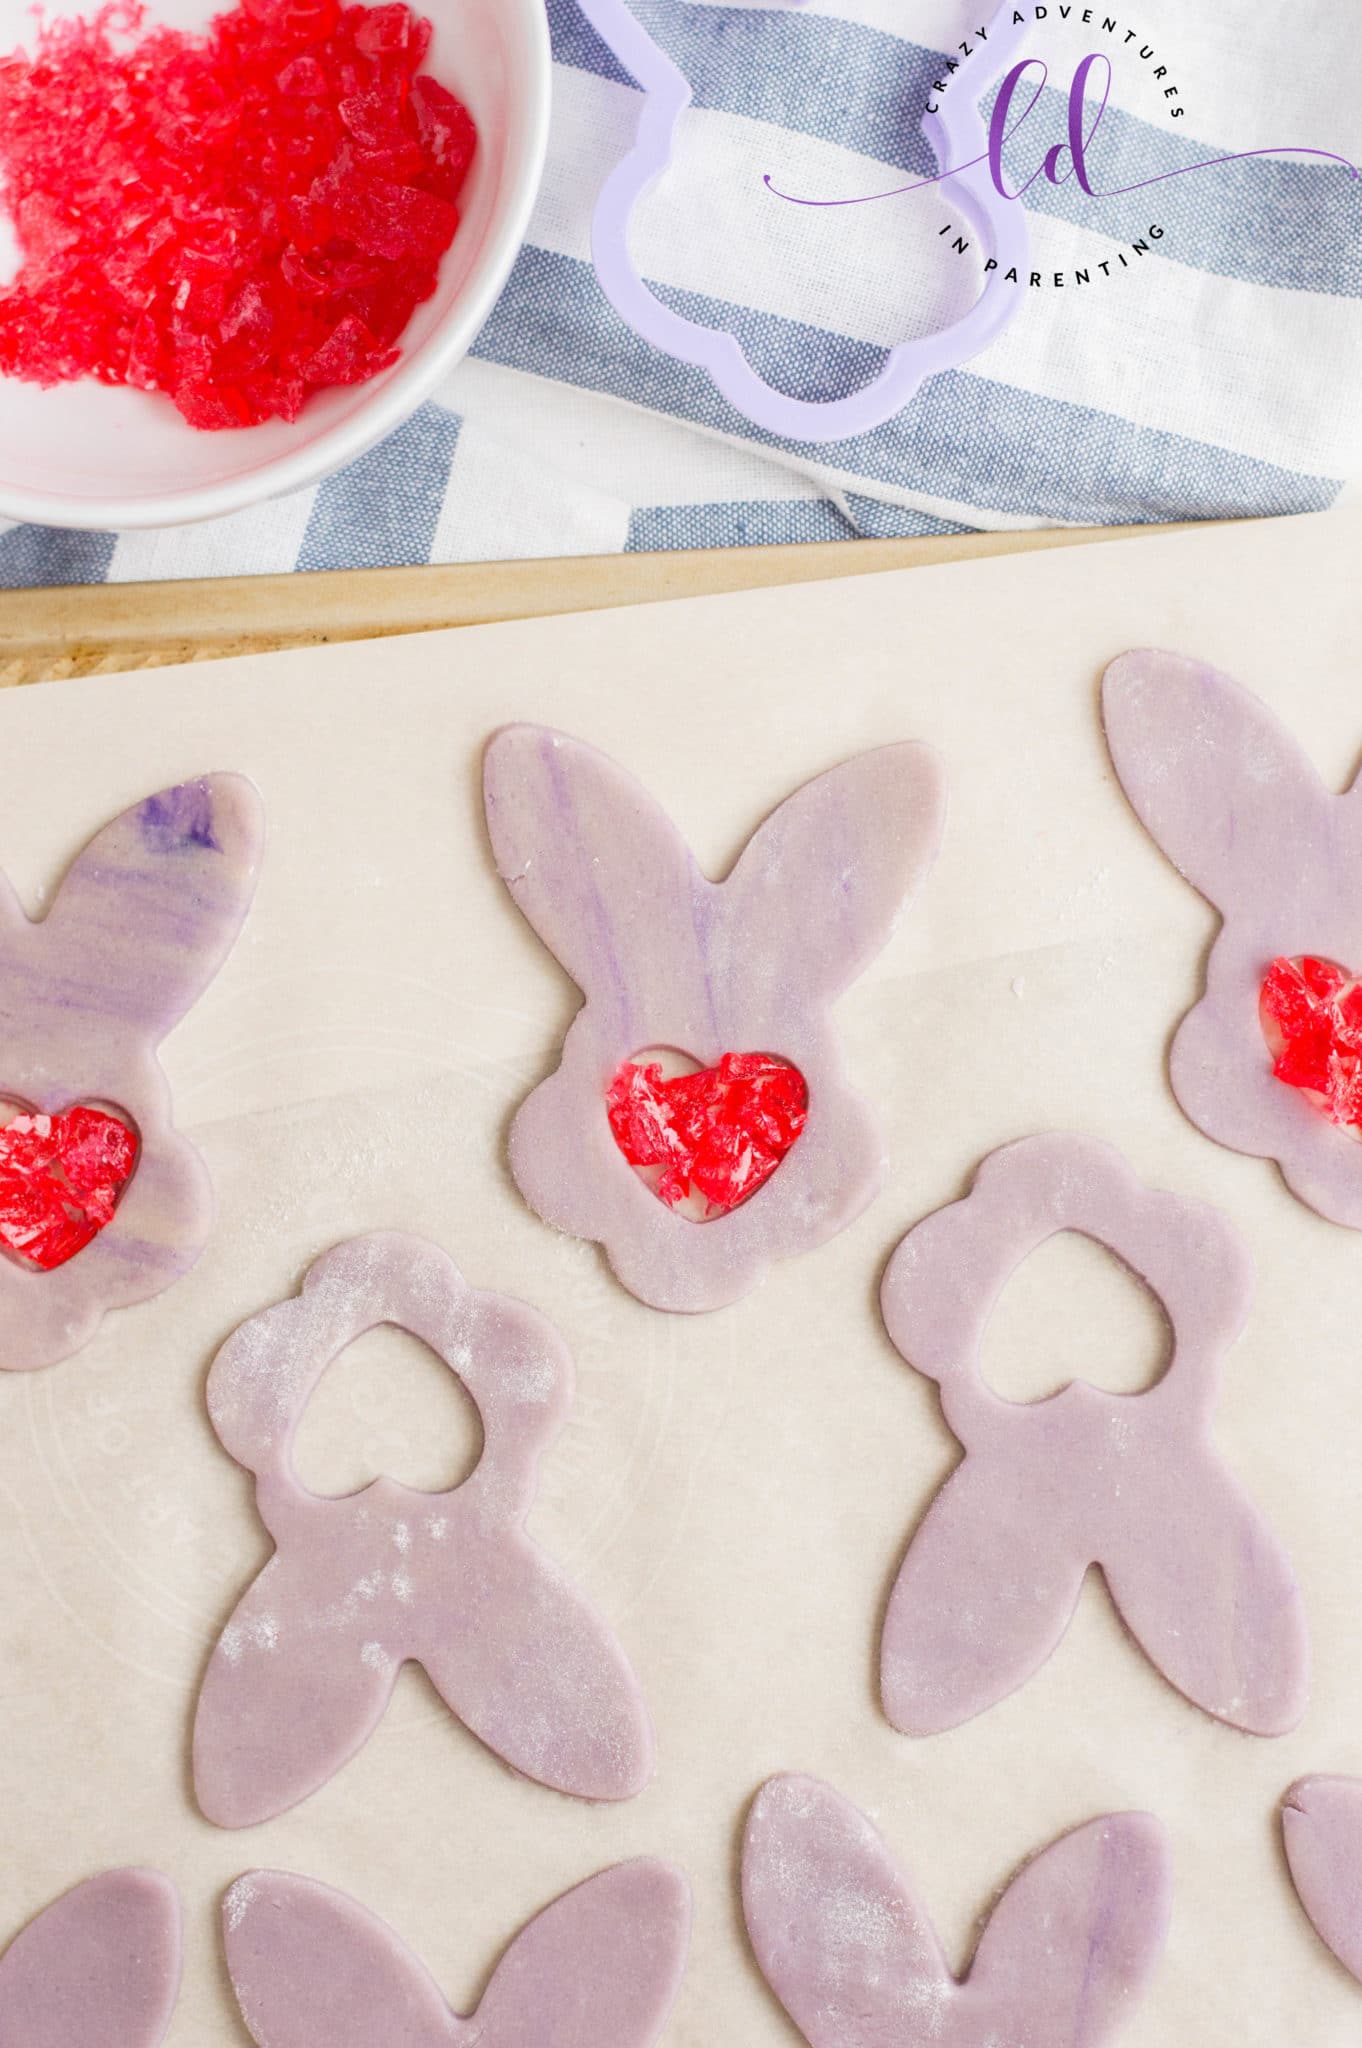 Add Crushed Candy to Heart-Shaped Hole to Make Bunny Stained Glass Cookies